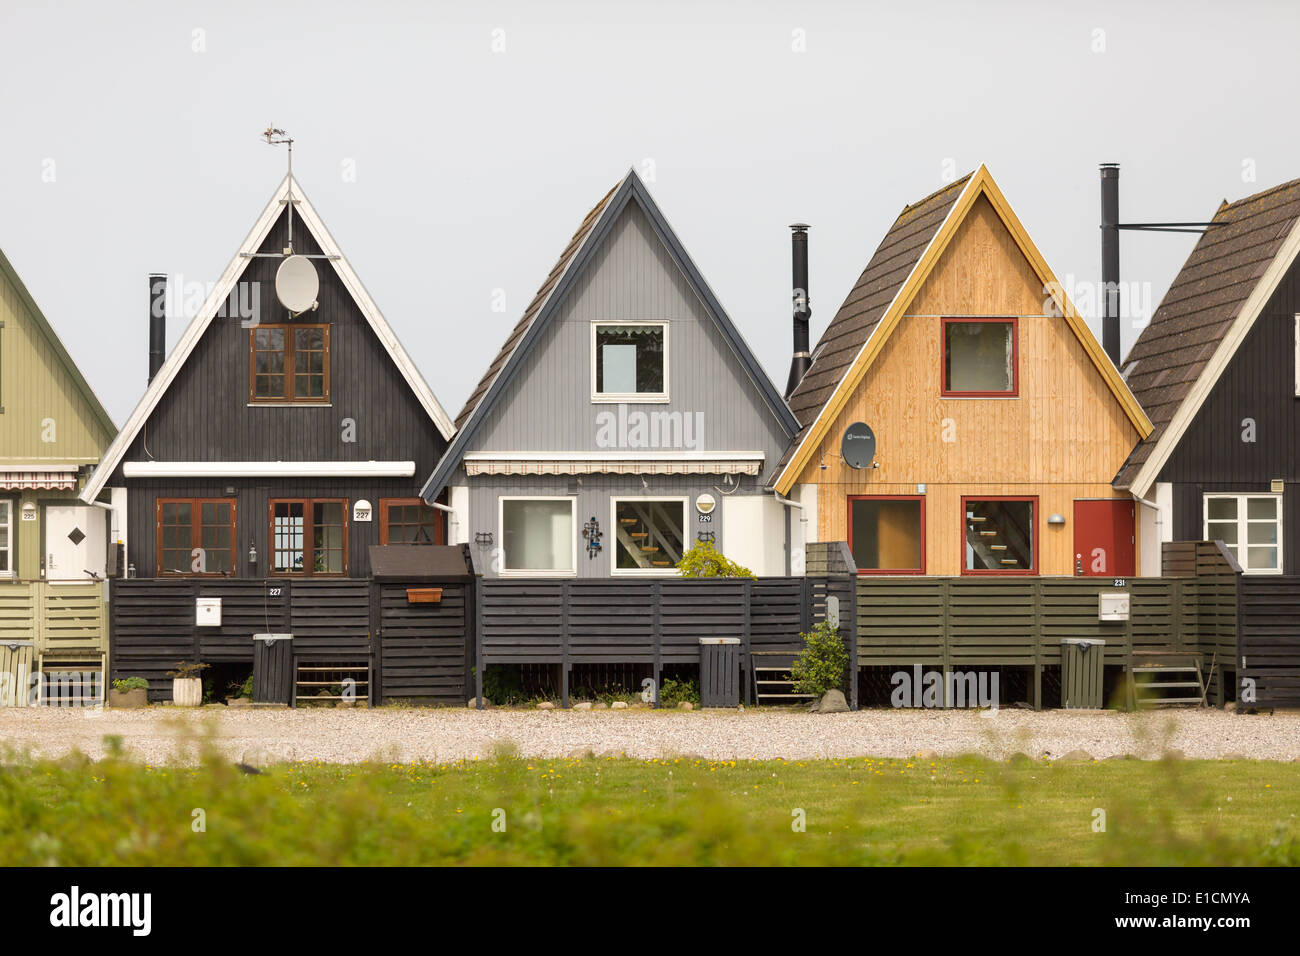 Townhouses in vacation area. Trademarks have been removed. Stock Photo